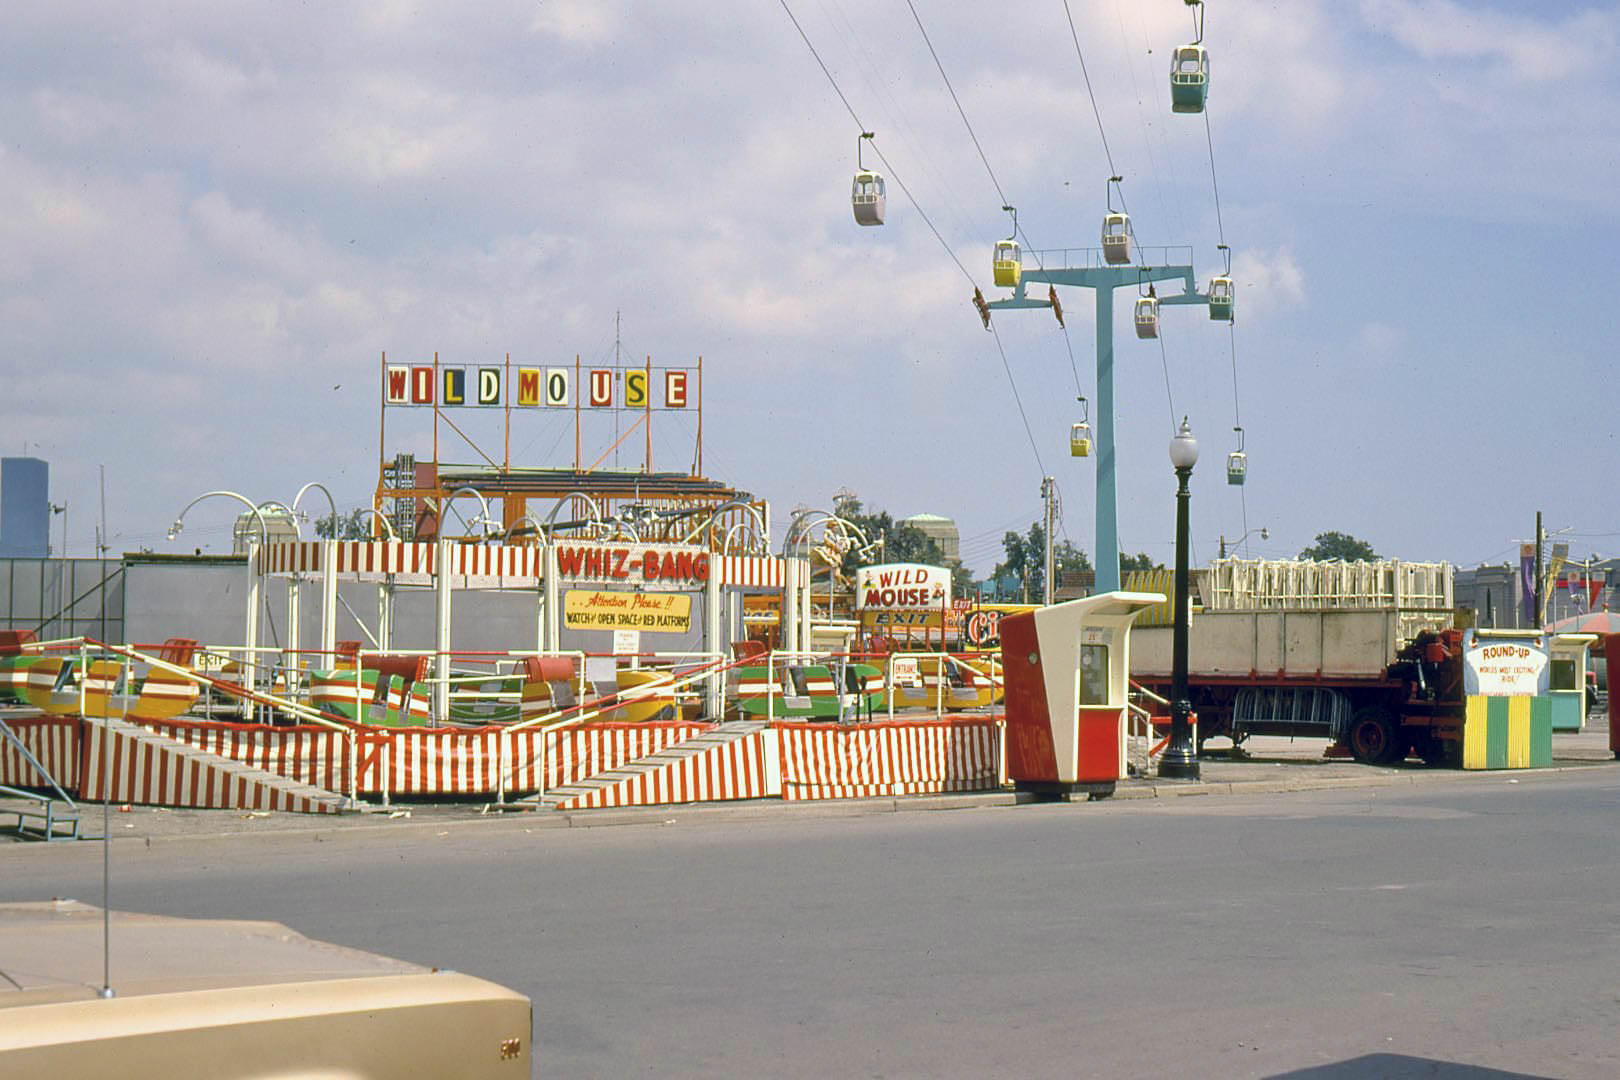 The Wild Mouse, CNE Midway, 1968